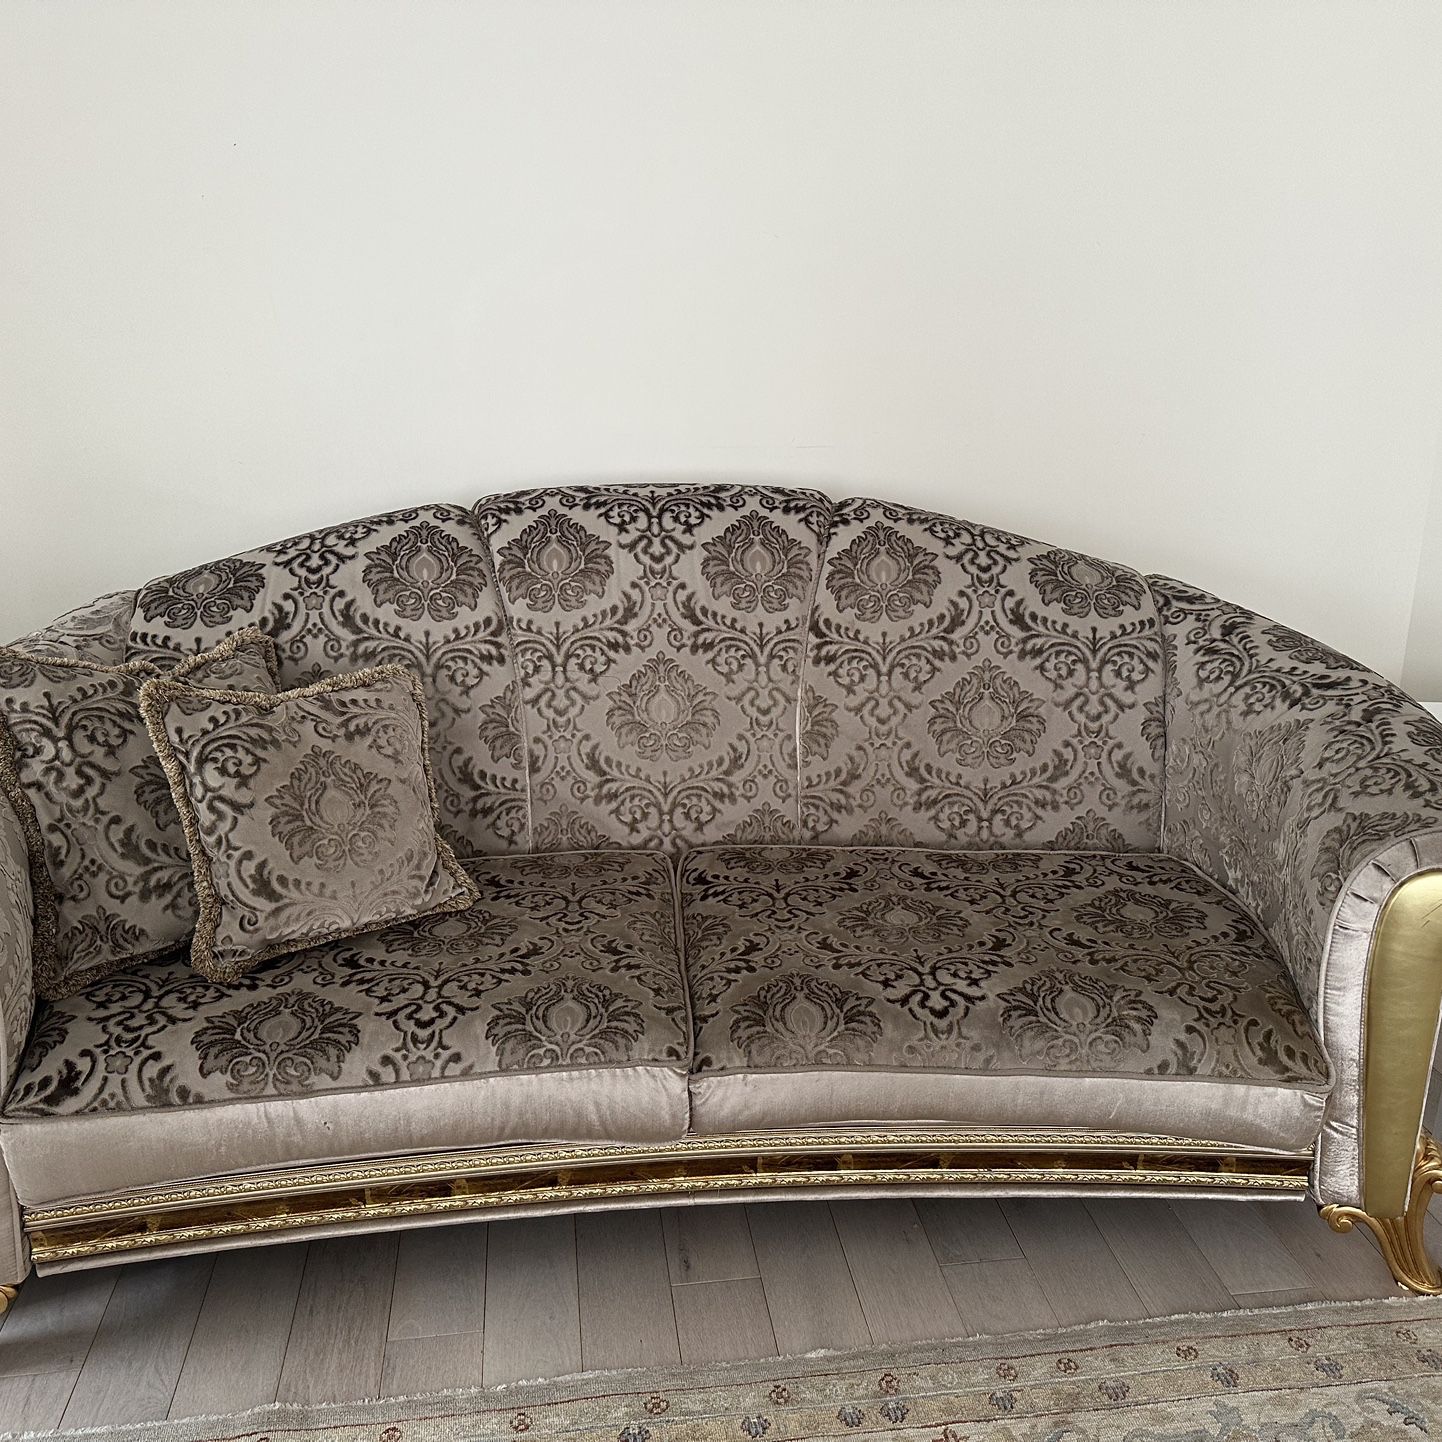 2 ITALIAN COUCHES FOR SALE Love Seat And Sofa